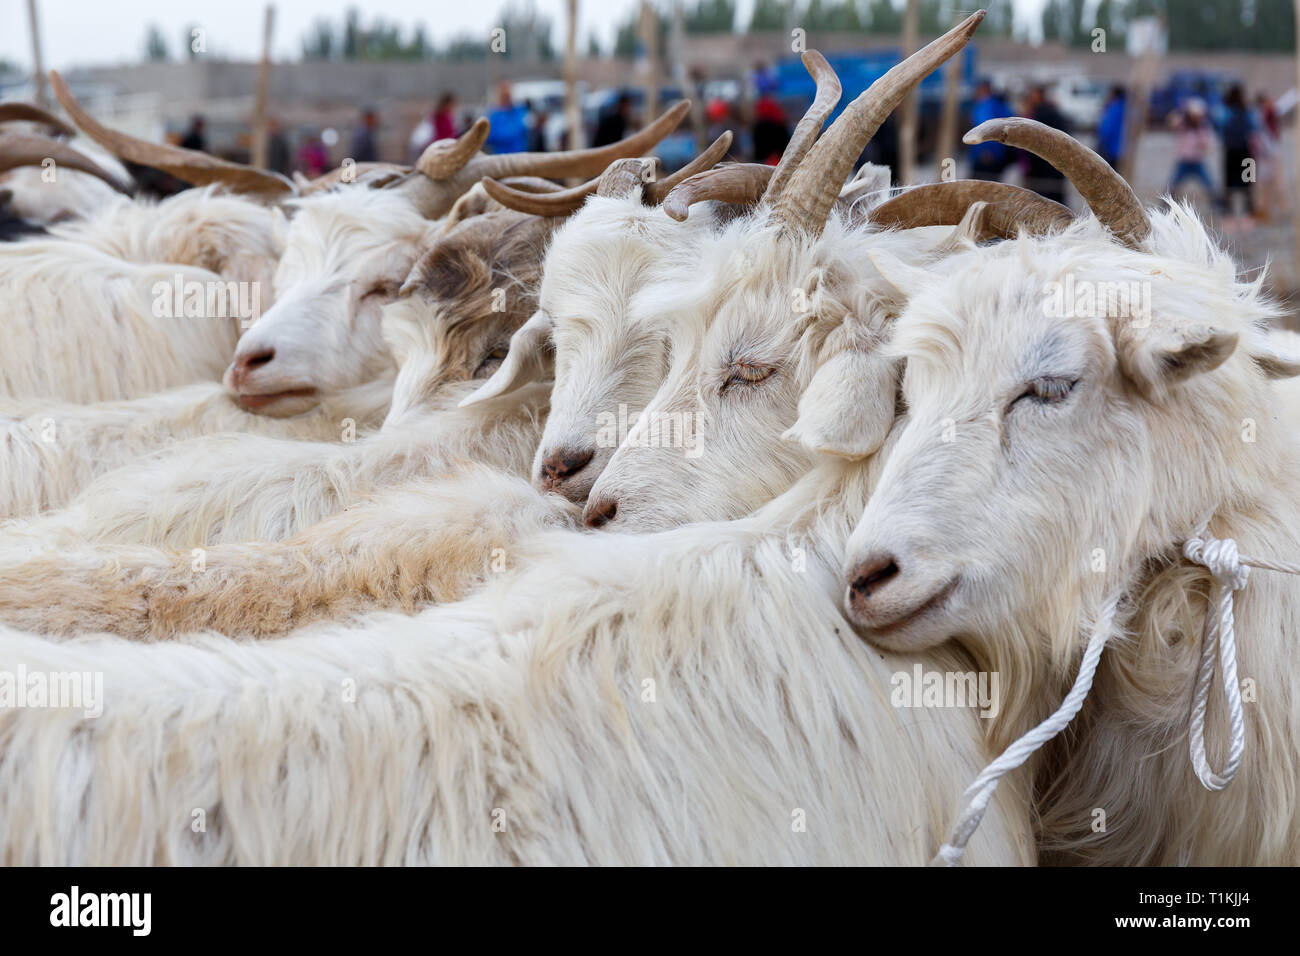 Goats tied together, ready for sale. Captured at Kashgar Animal Market (Xinjiang Province, China) Stock Photo